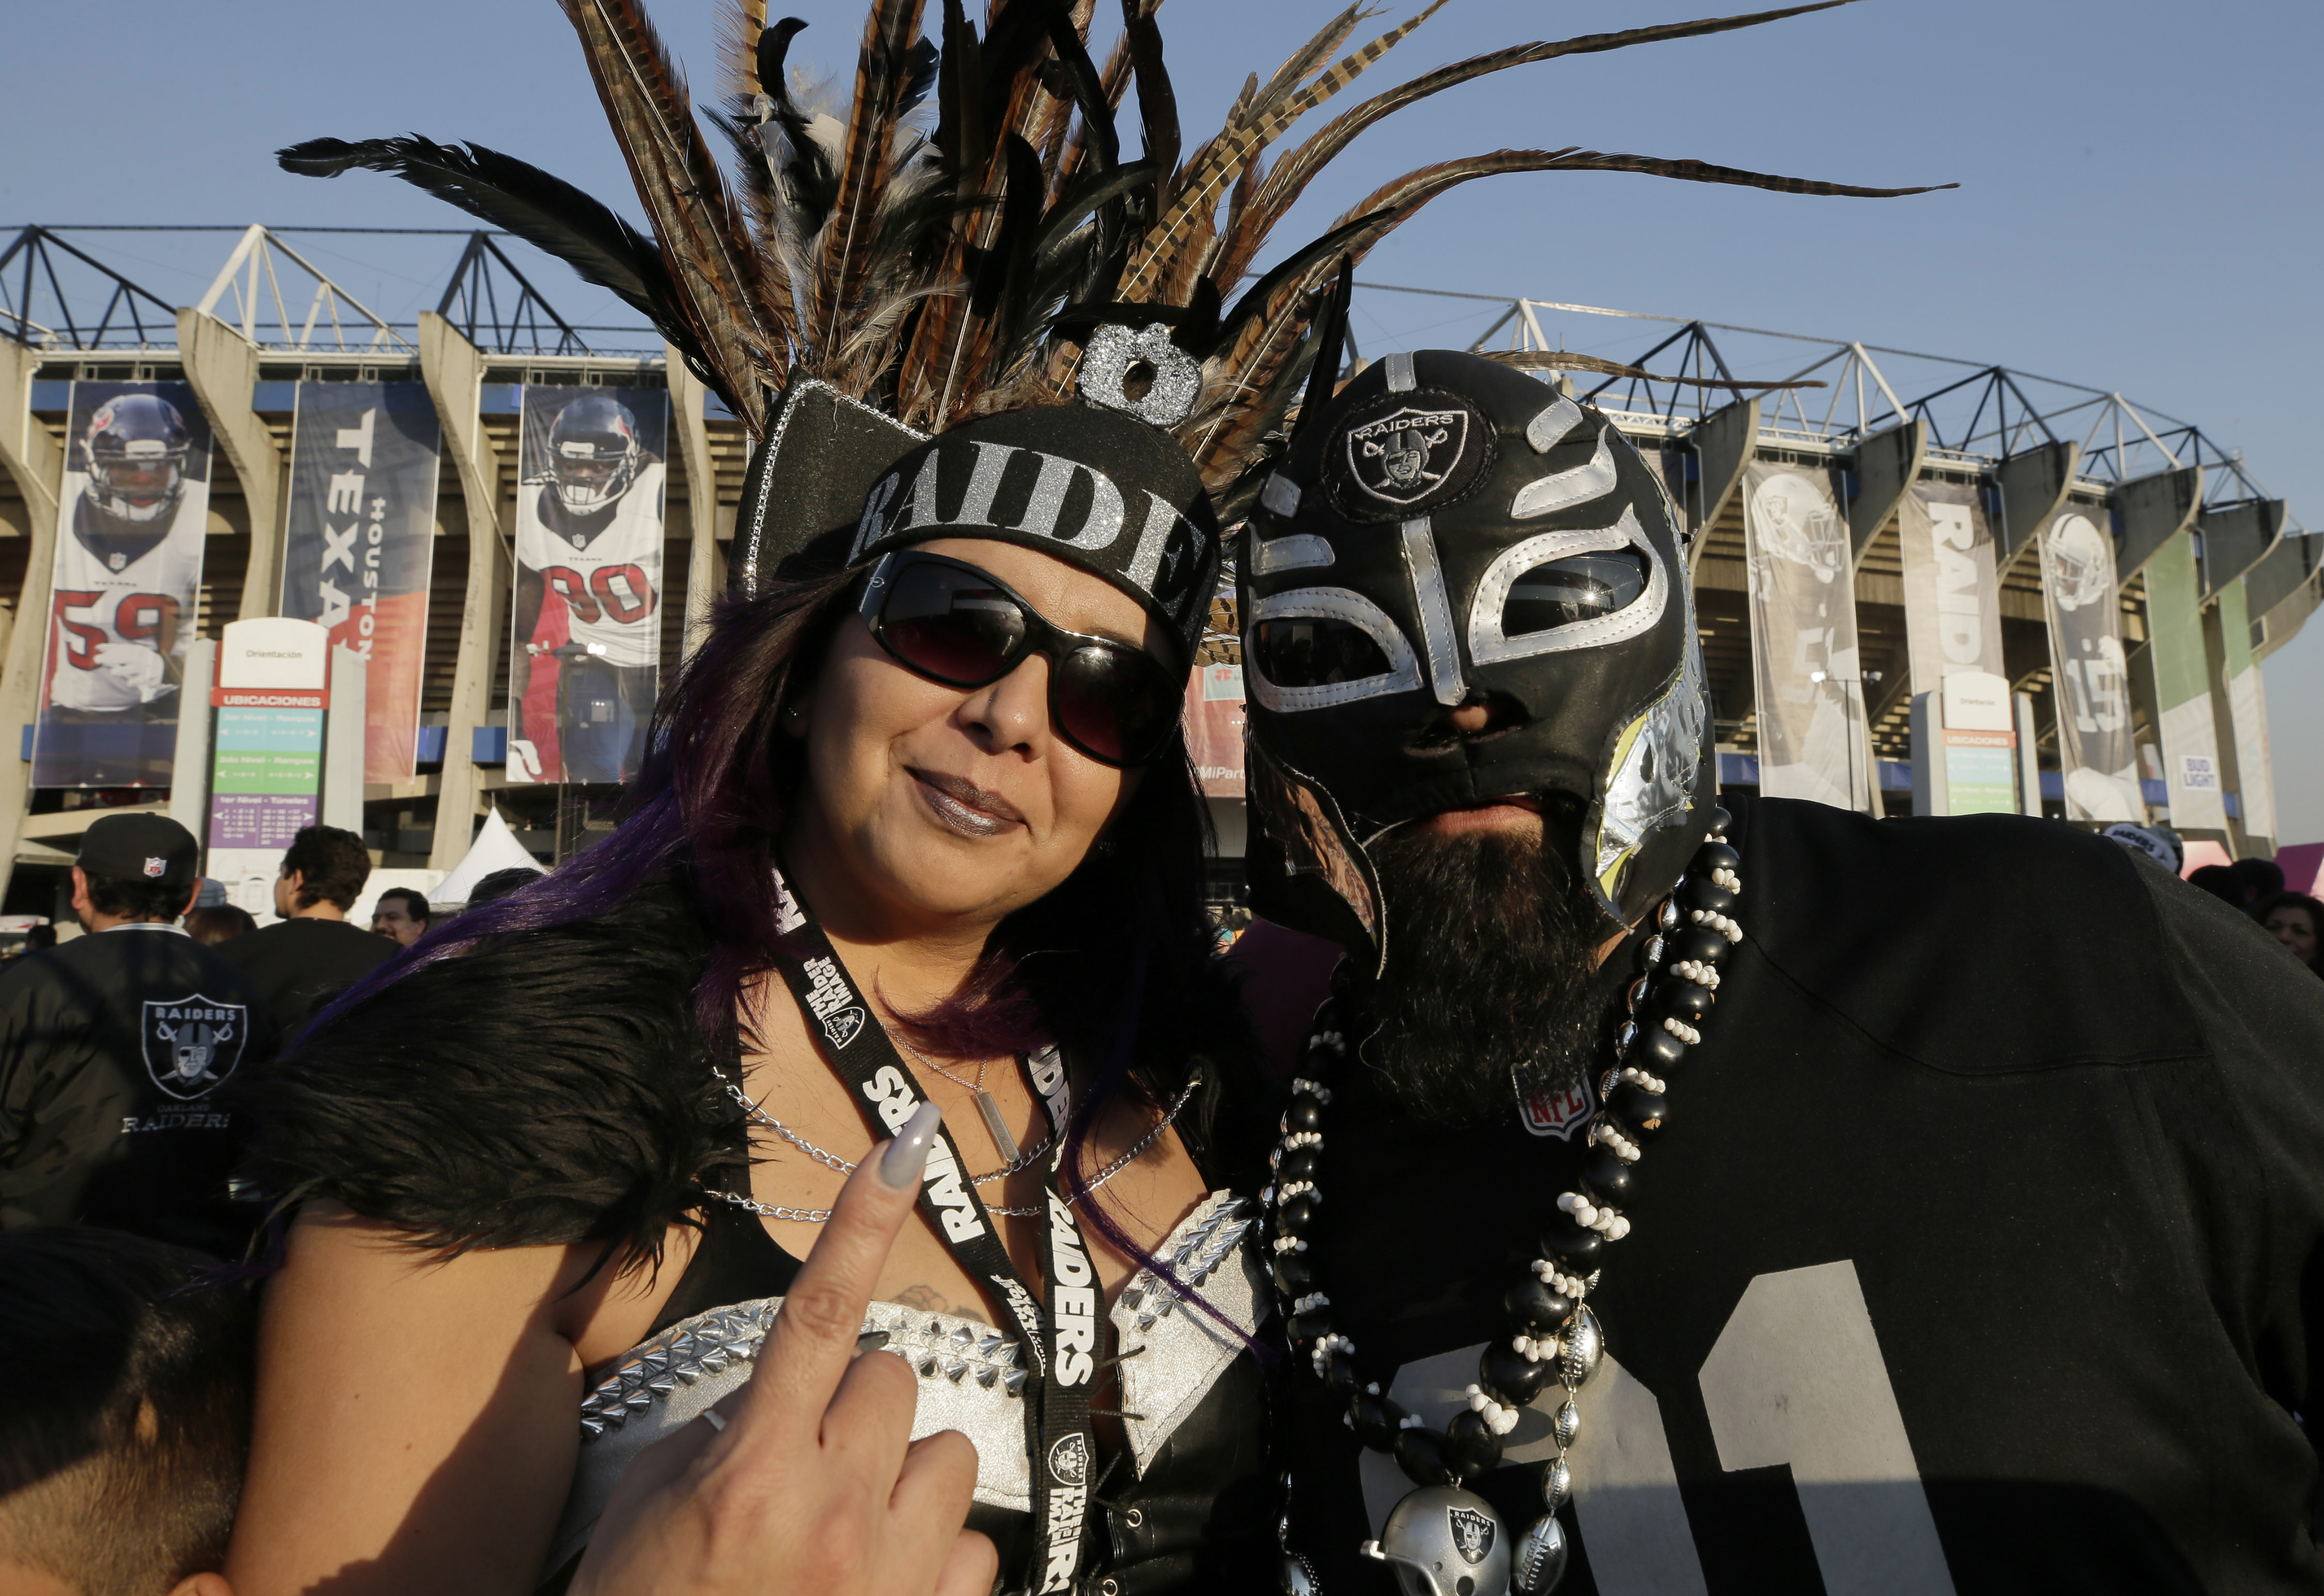 Raiders fans overrun Mexico City for Monday night clash with Texans